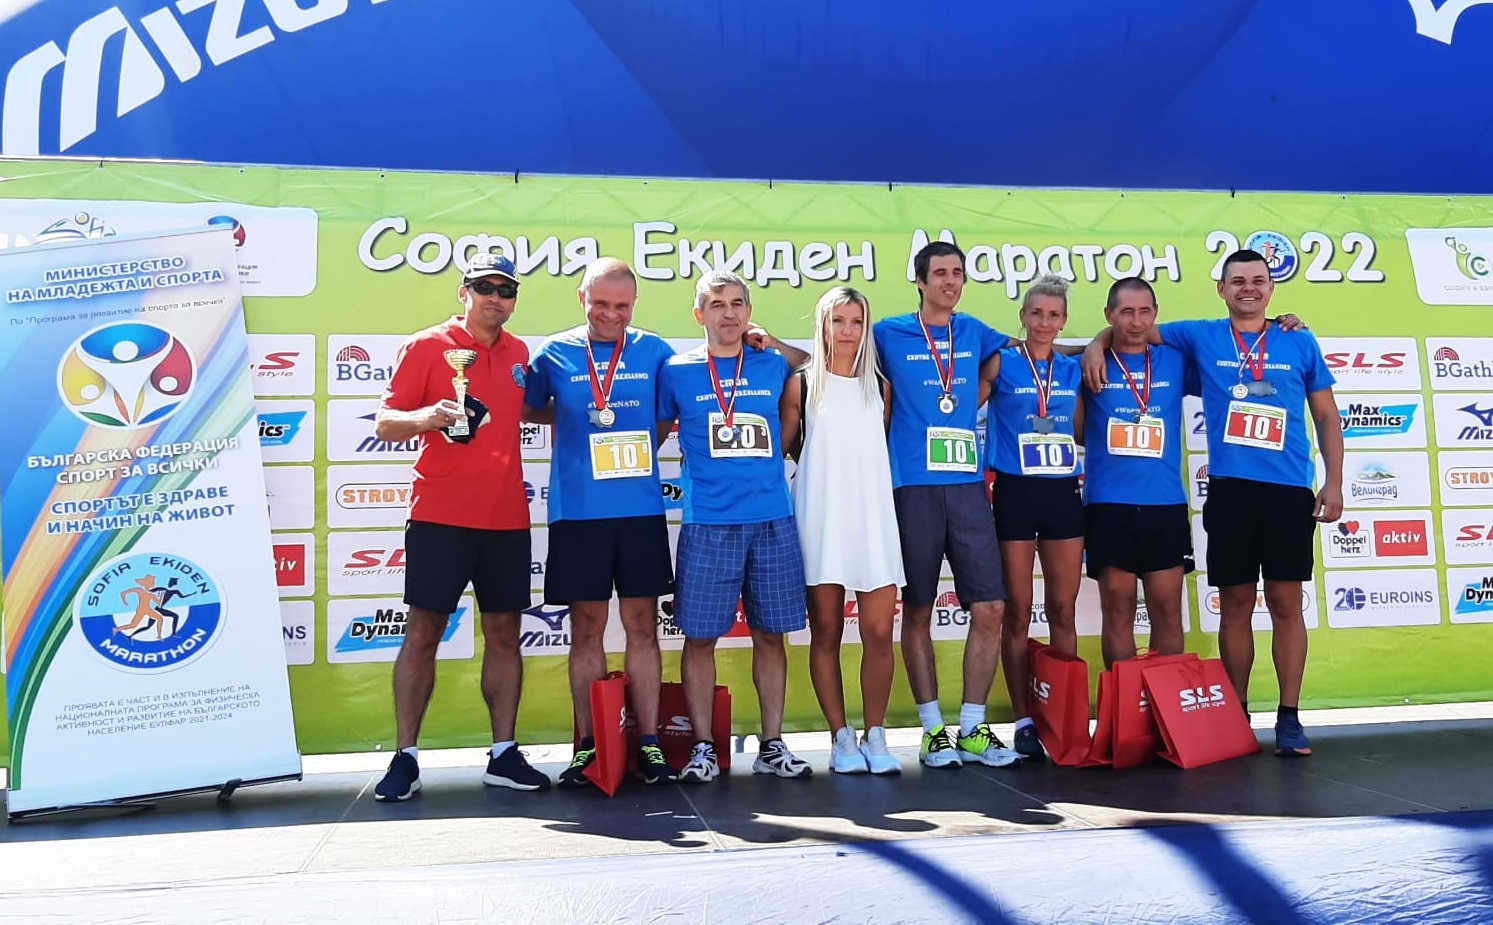 Gained Cup at the 8th Sofia Ekiden (Relay) Marathon